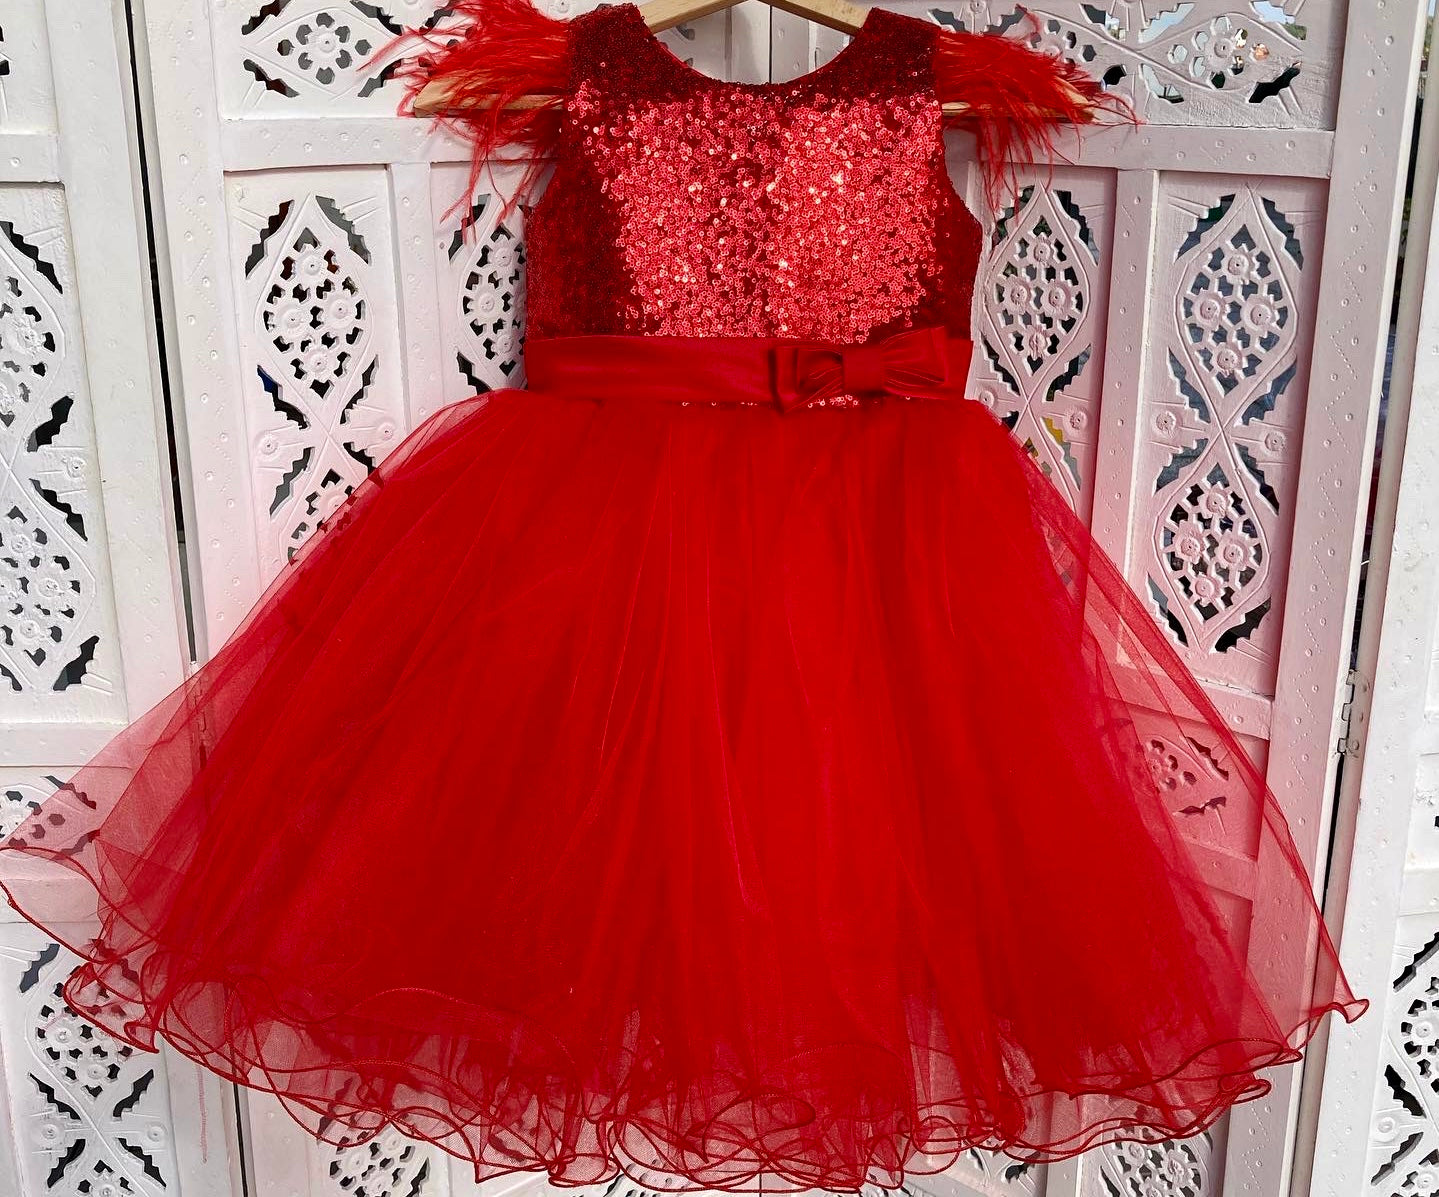 Red Sequins Dress with Feathers